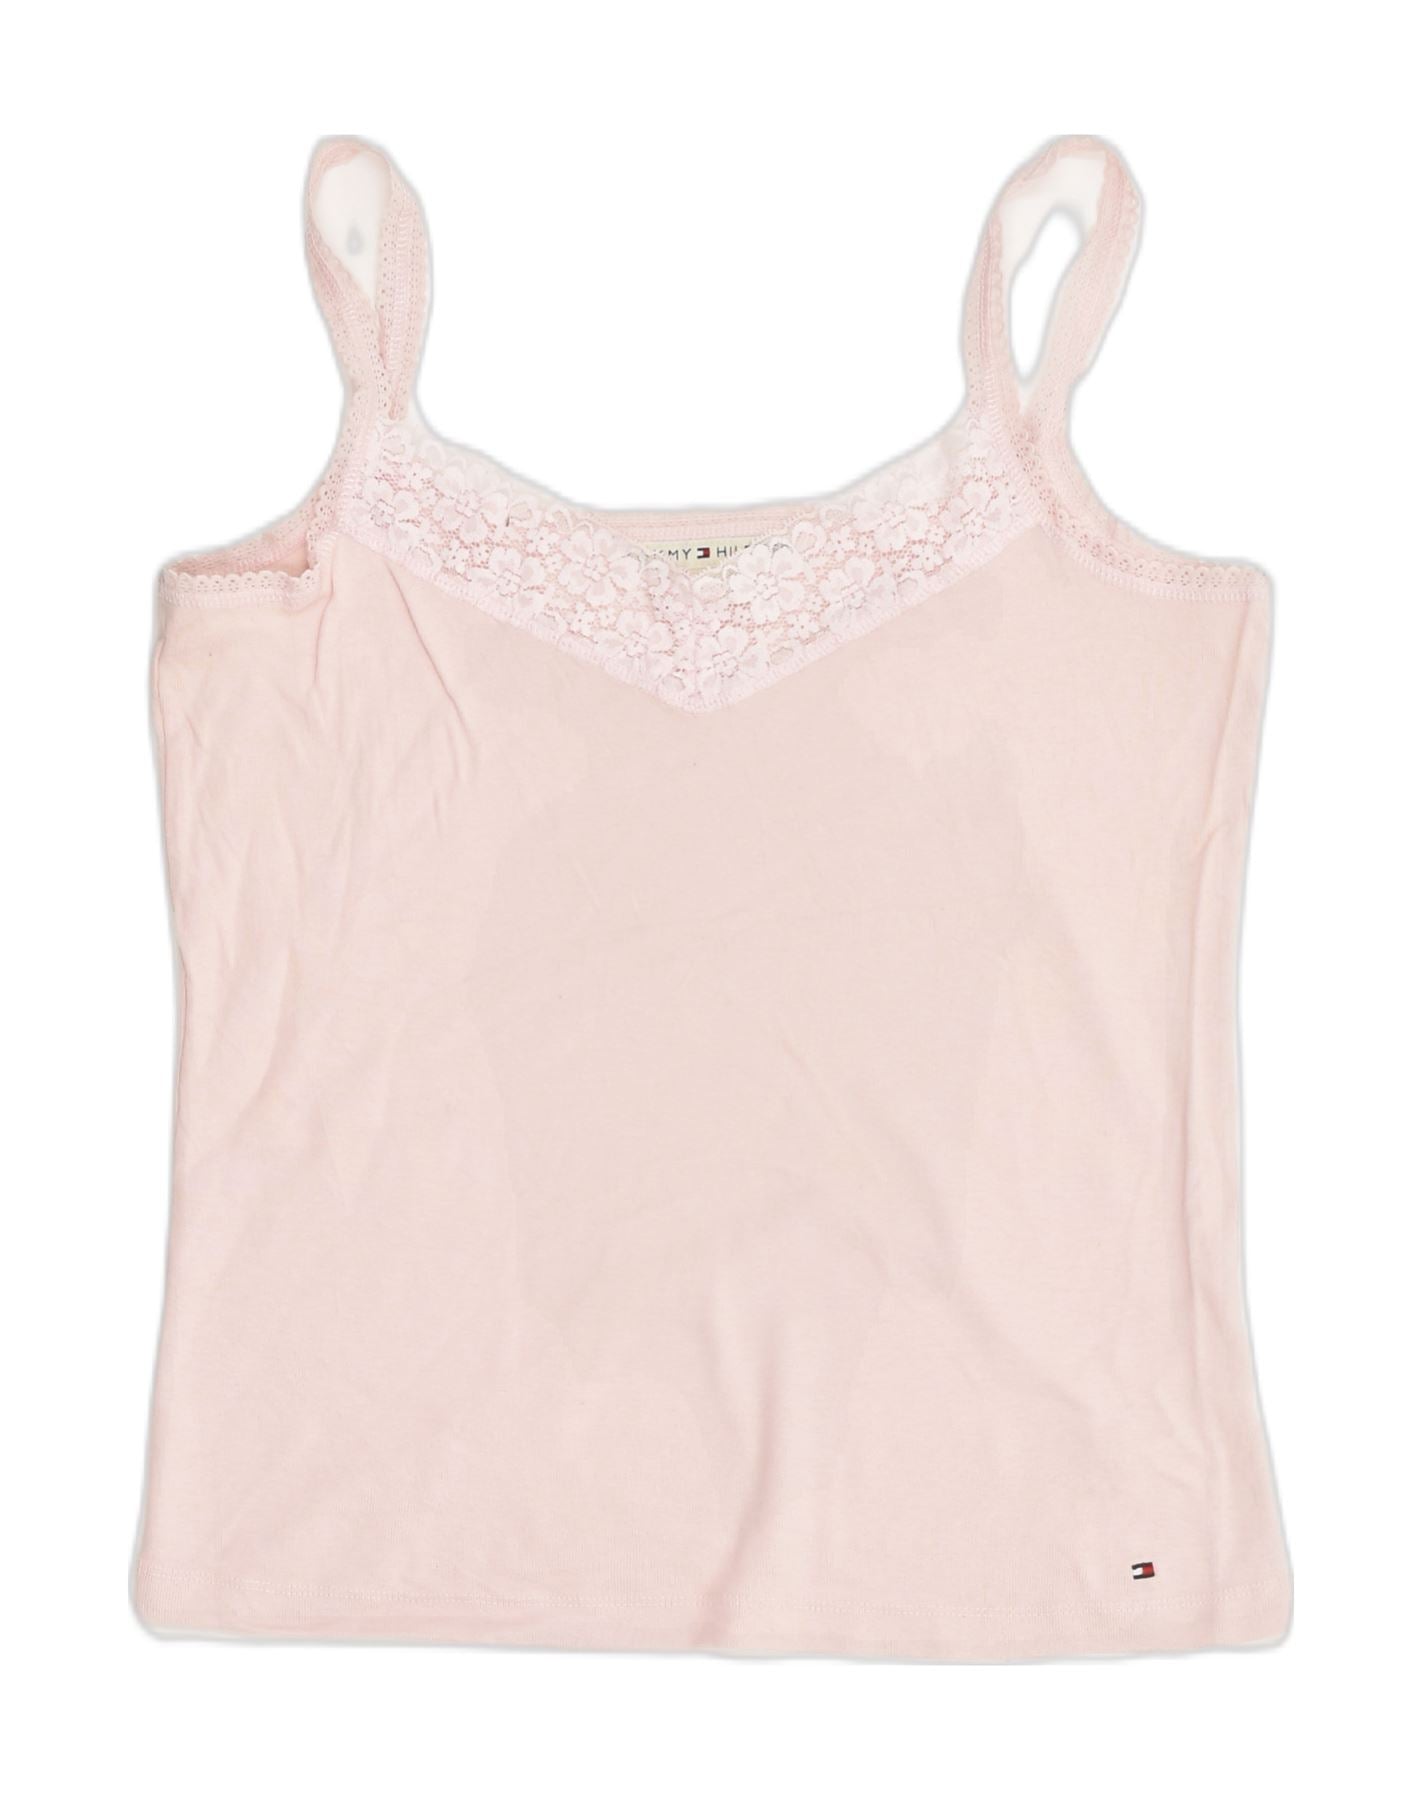 TOMMY HILFIGER Womens Cami Top UK 18 XL Pink Cotton, Vintage & Second-Hand  Clothing Online